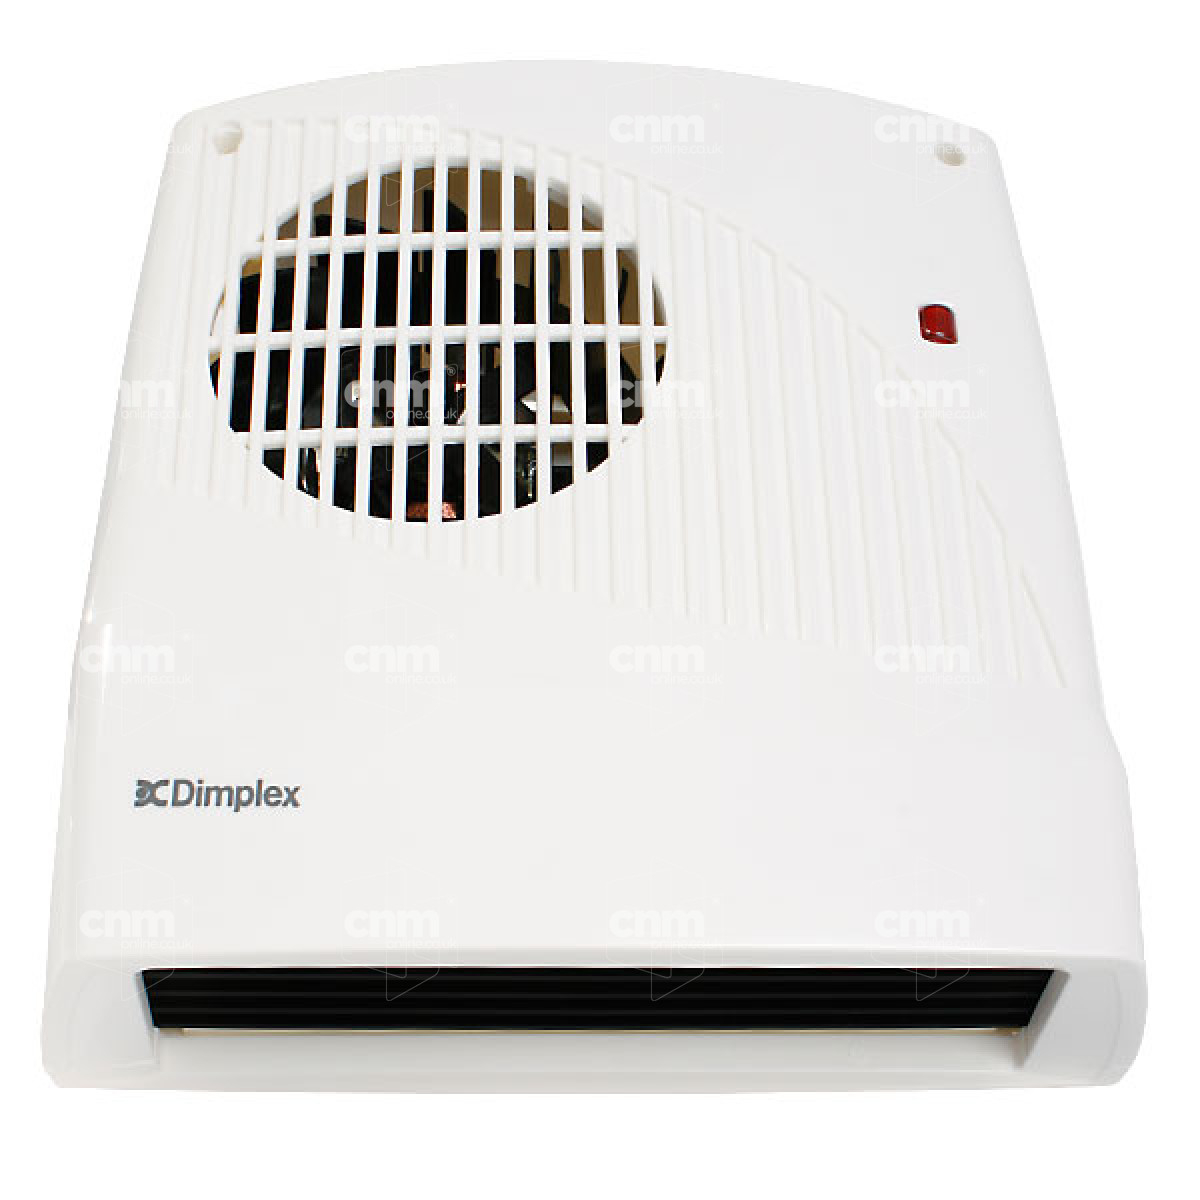 Dimplex Downflow Fan Heater intended for proportions 1200 X 1200